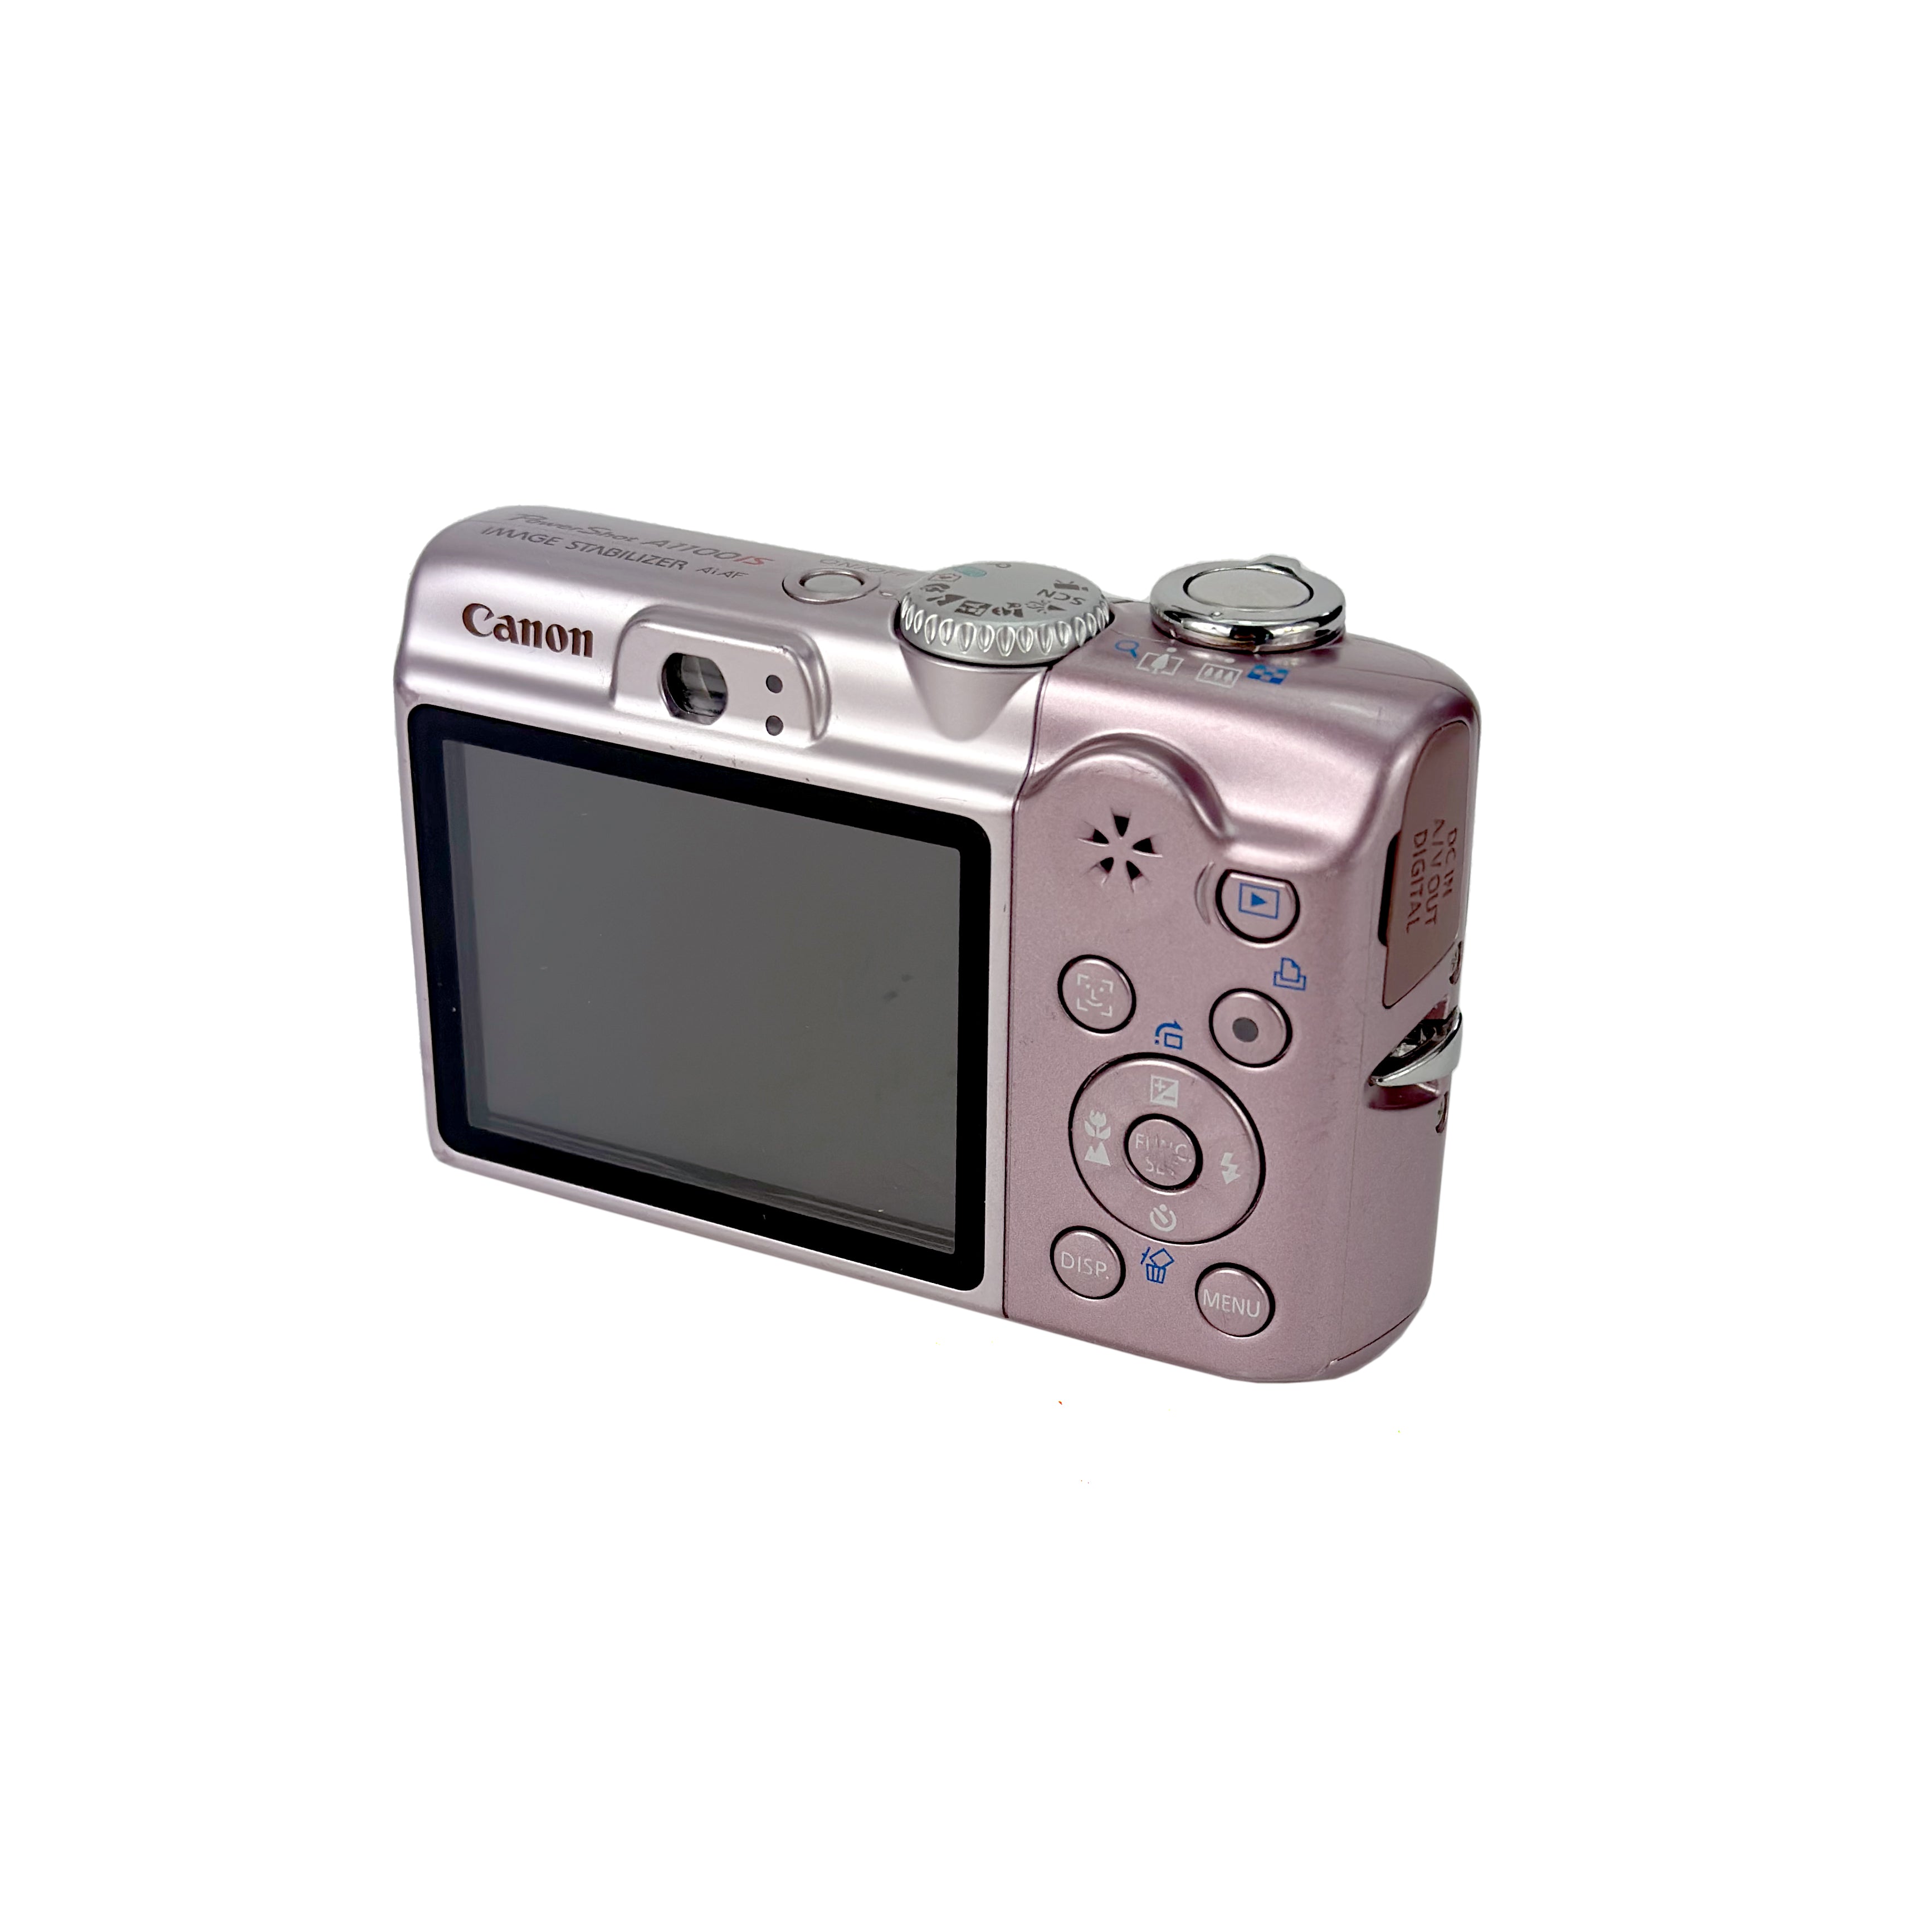 Canon PowerShot A1100 IS Digital Compact - Pink